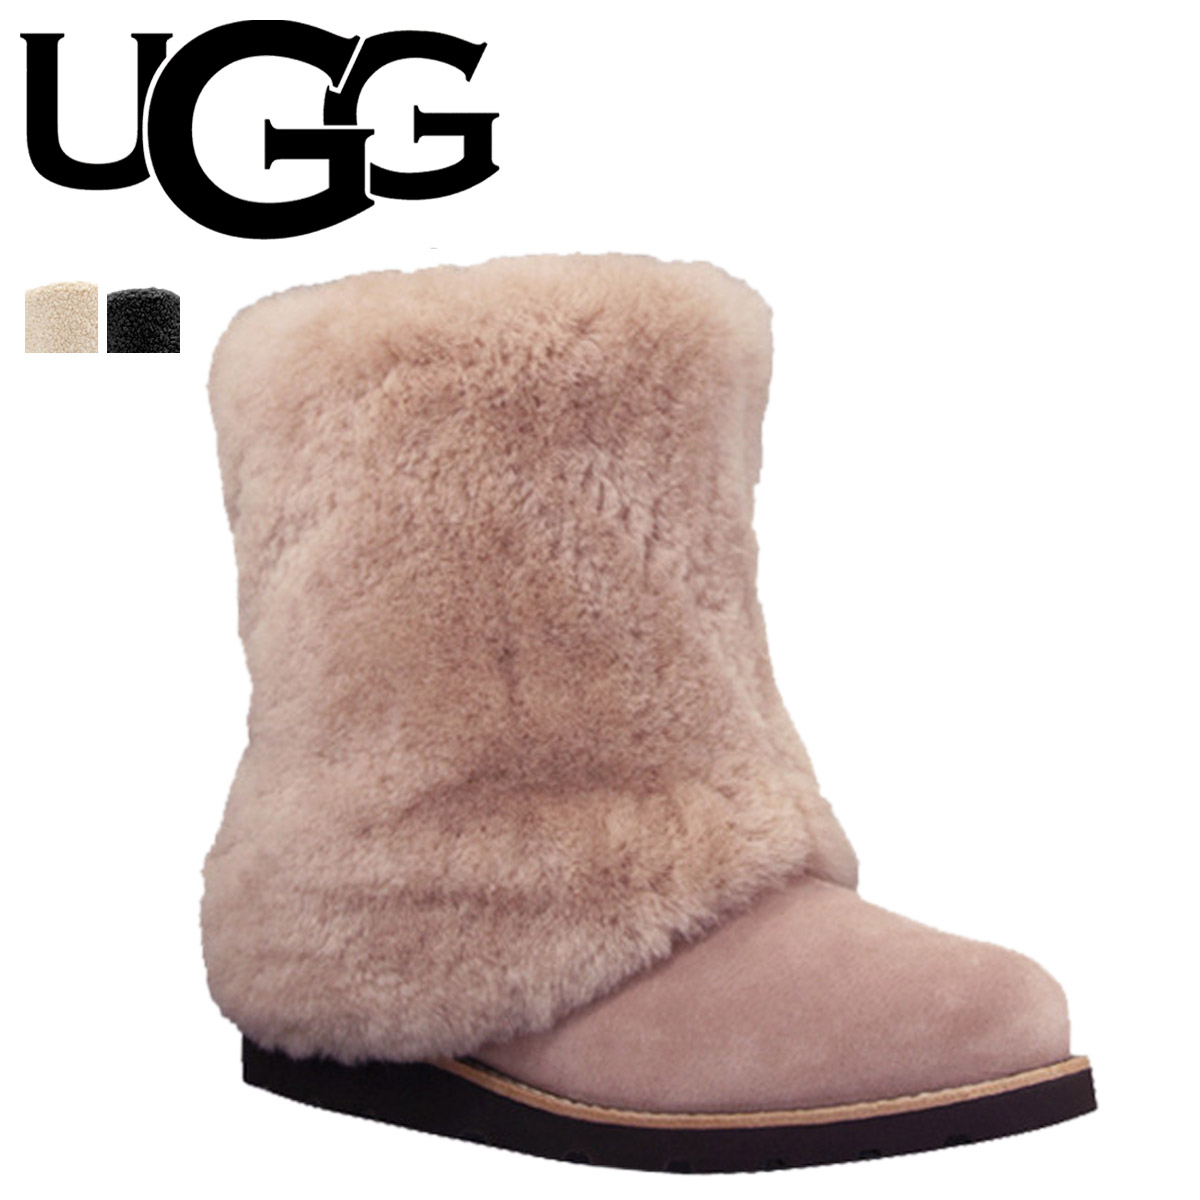 where can i buy ugg boots near me